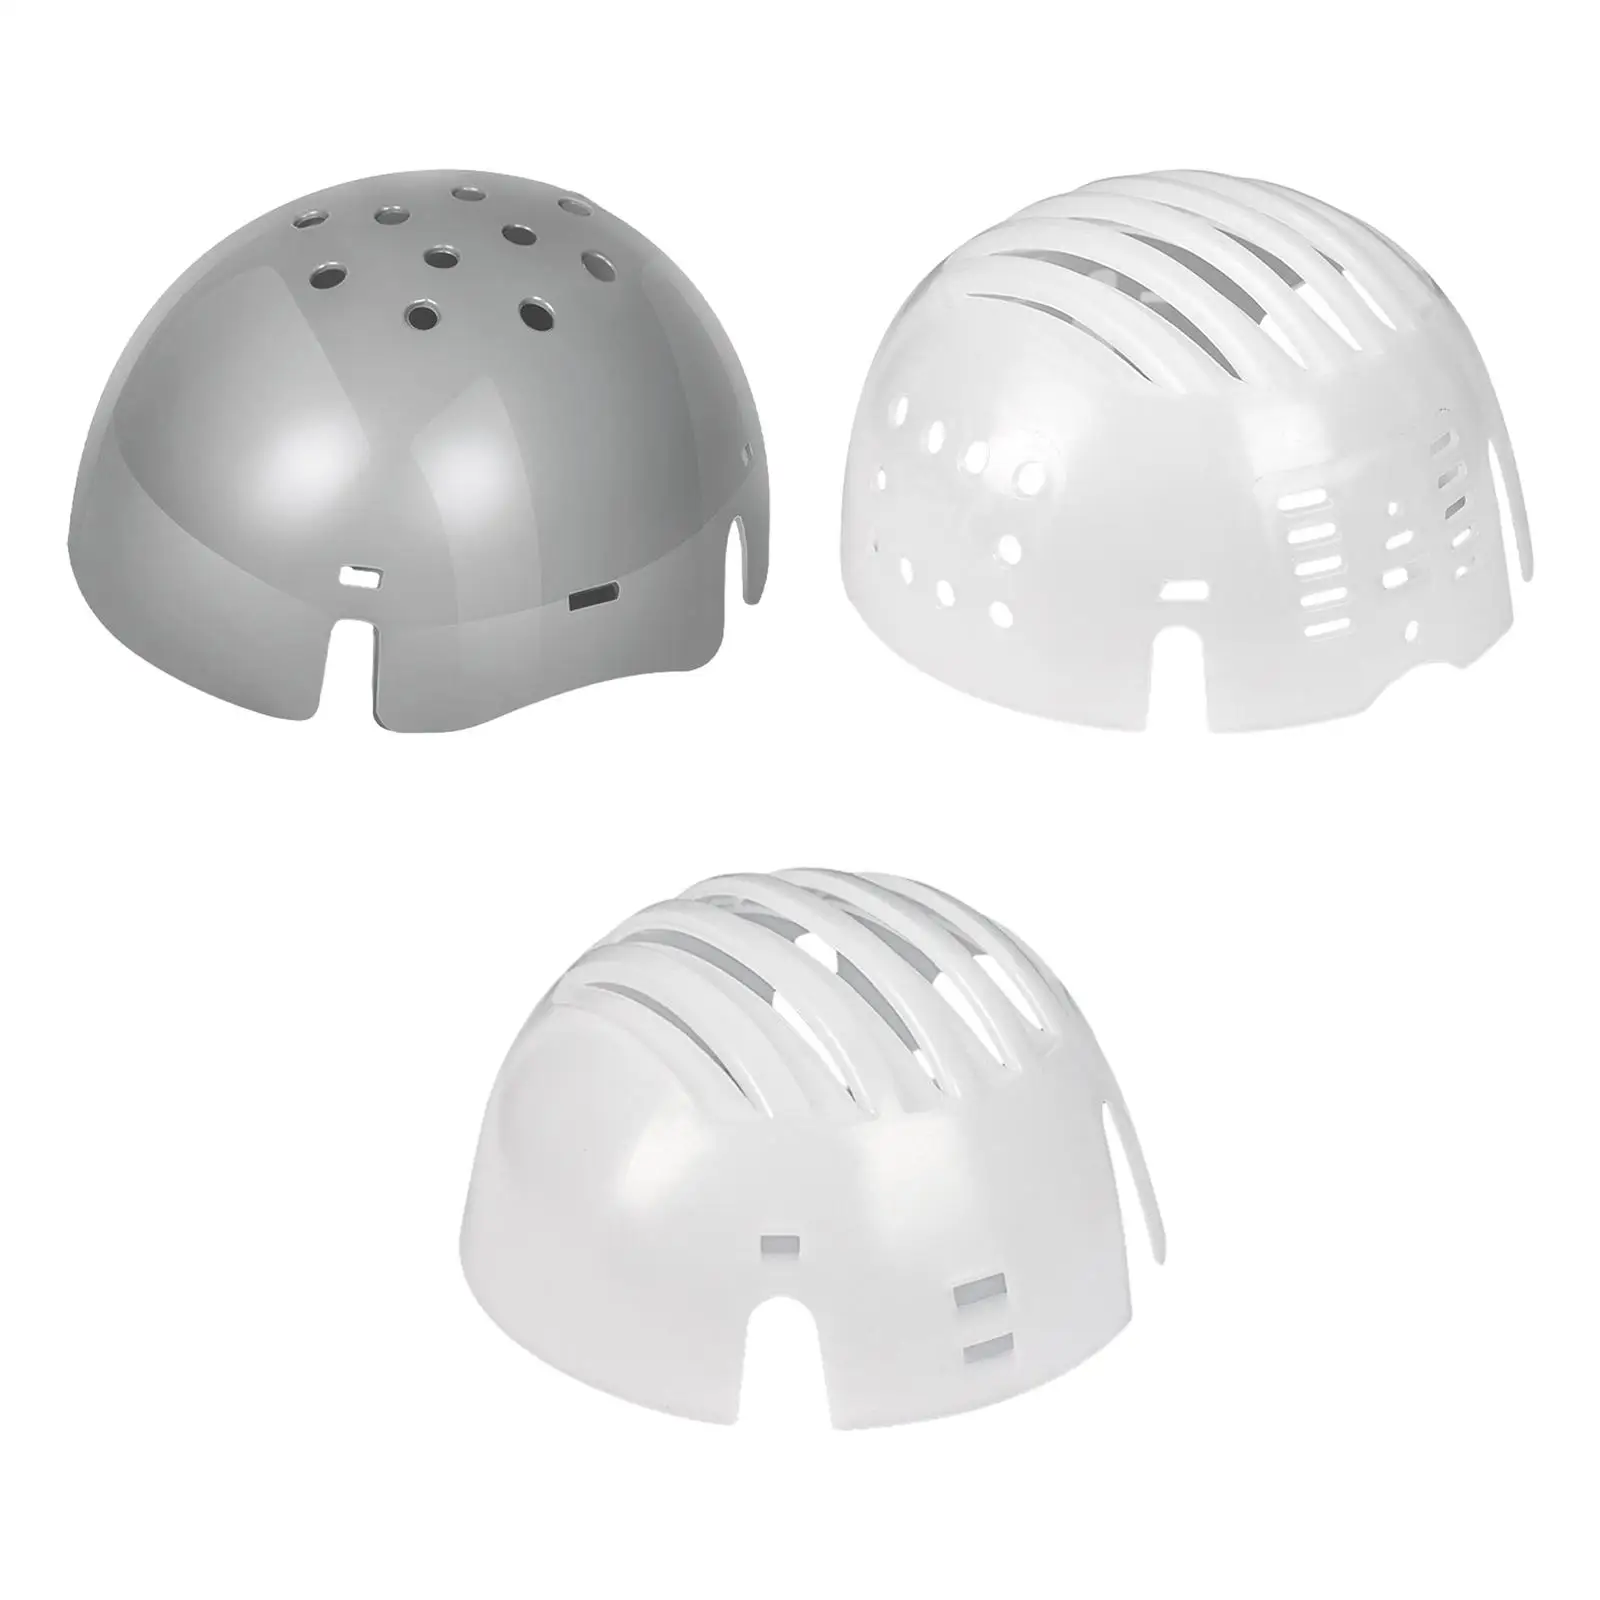 Crash Cap Liner Insert Shell Universal Collision Cap Lining Protective Impact Protection Hard Hat Reusable Sports Hat Liner